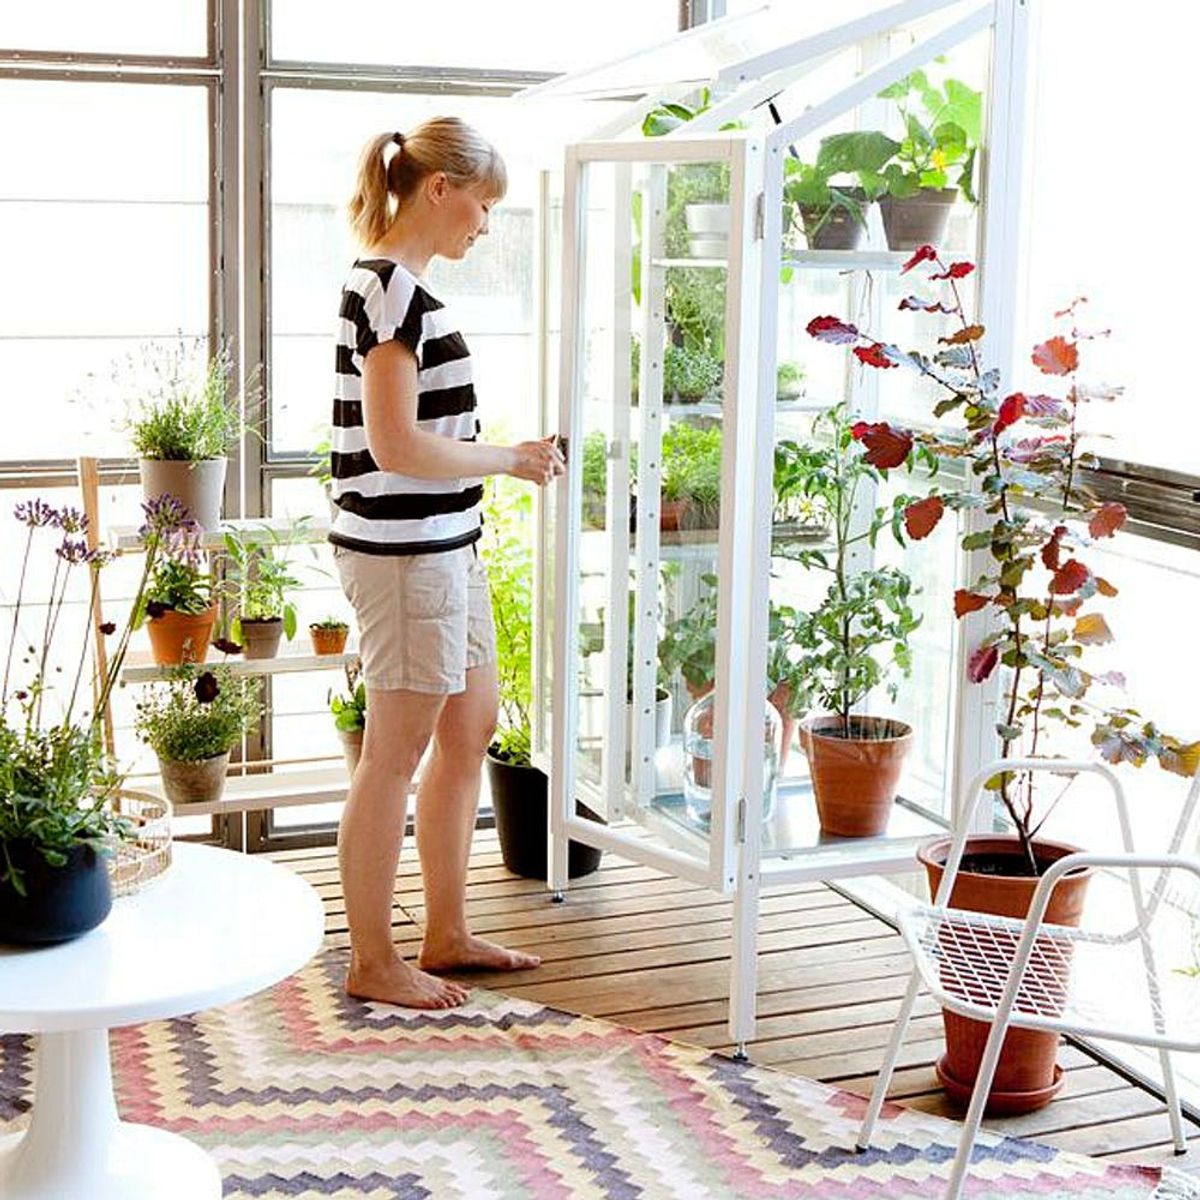 12 Dream Greenhouses to Make You Green With Envy